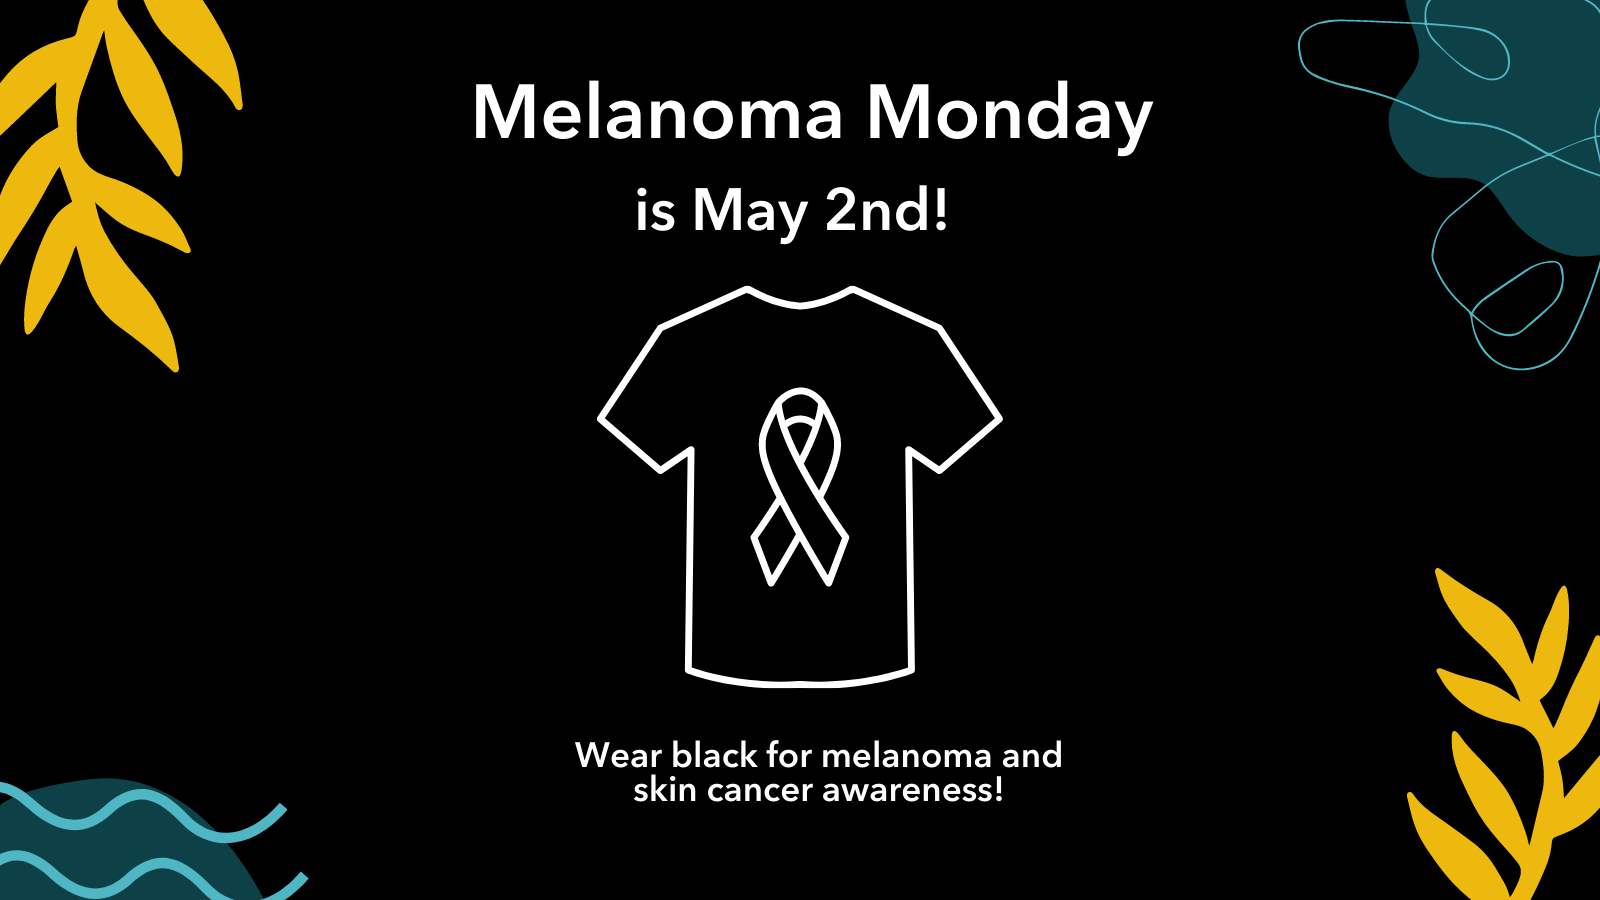 Image of black t-shirt with cancer ribbon. Background is decorated with blue and yellow decorations. Text reads: Melanoma Monday is May 2nd! Wear black for melanoma and skin cancer awareness!